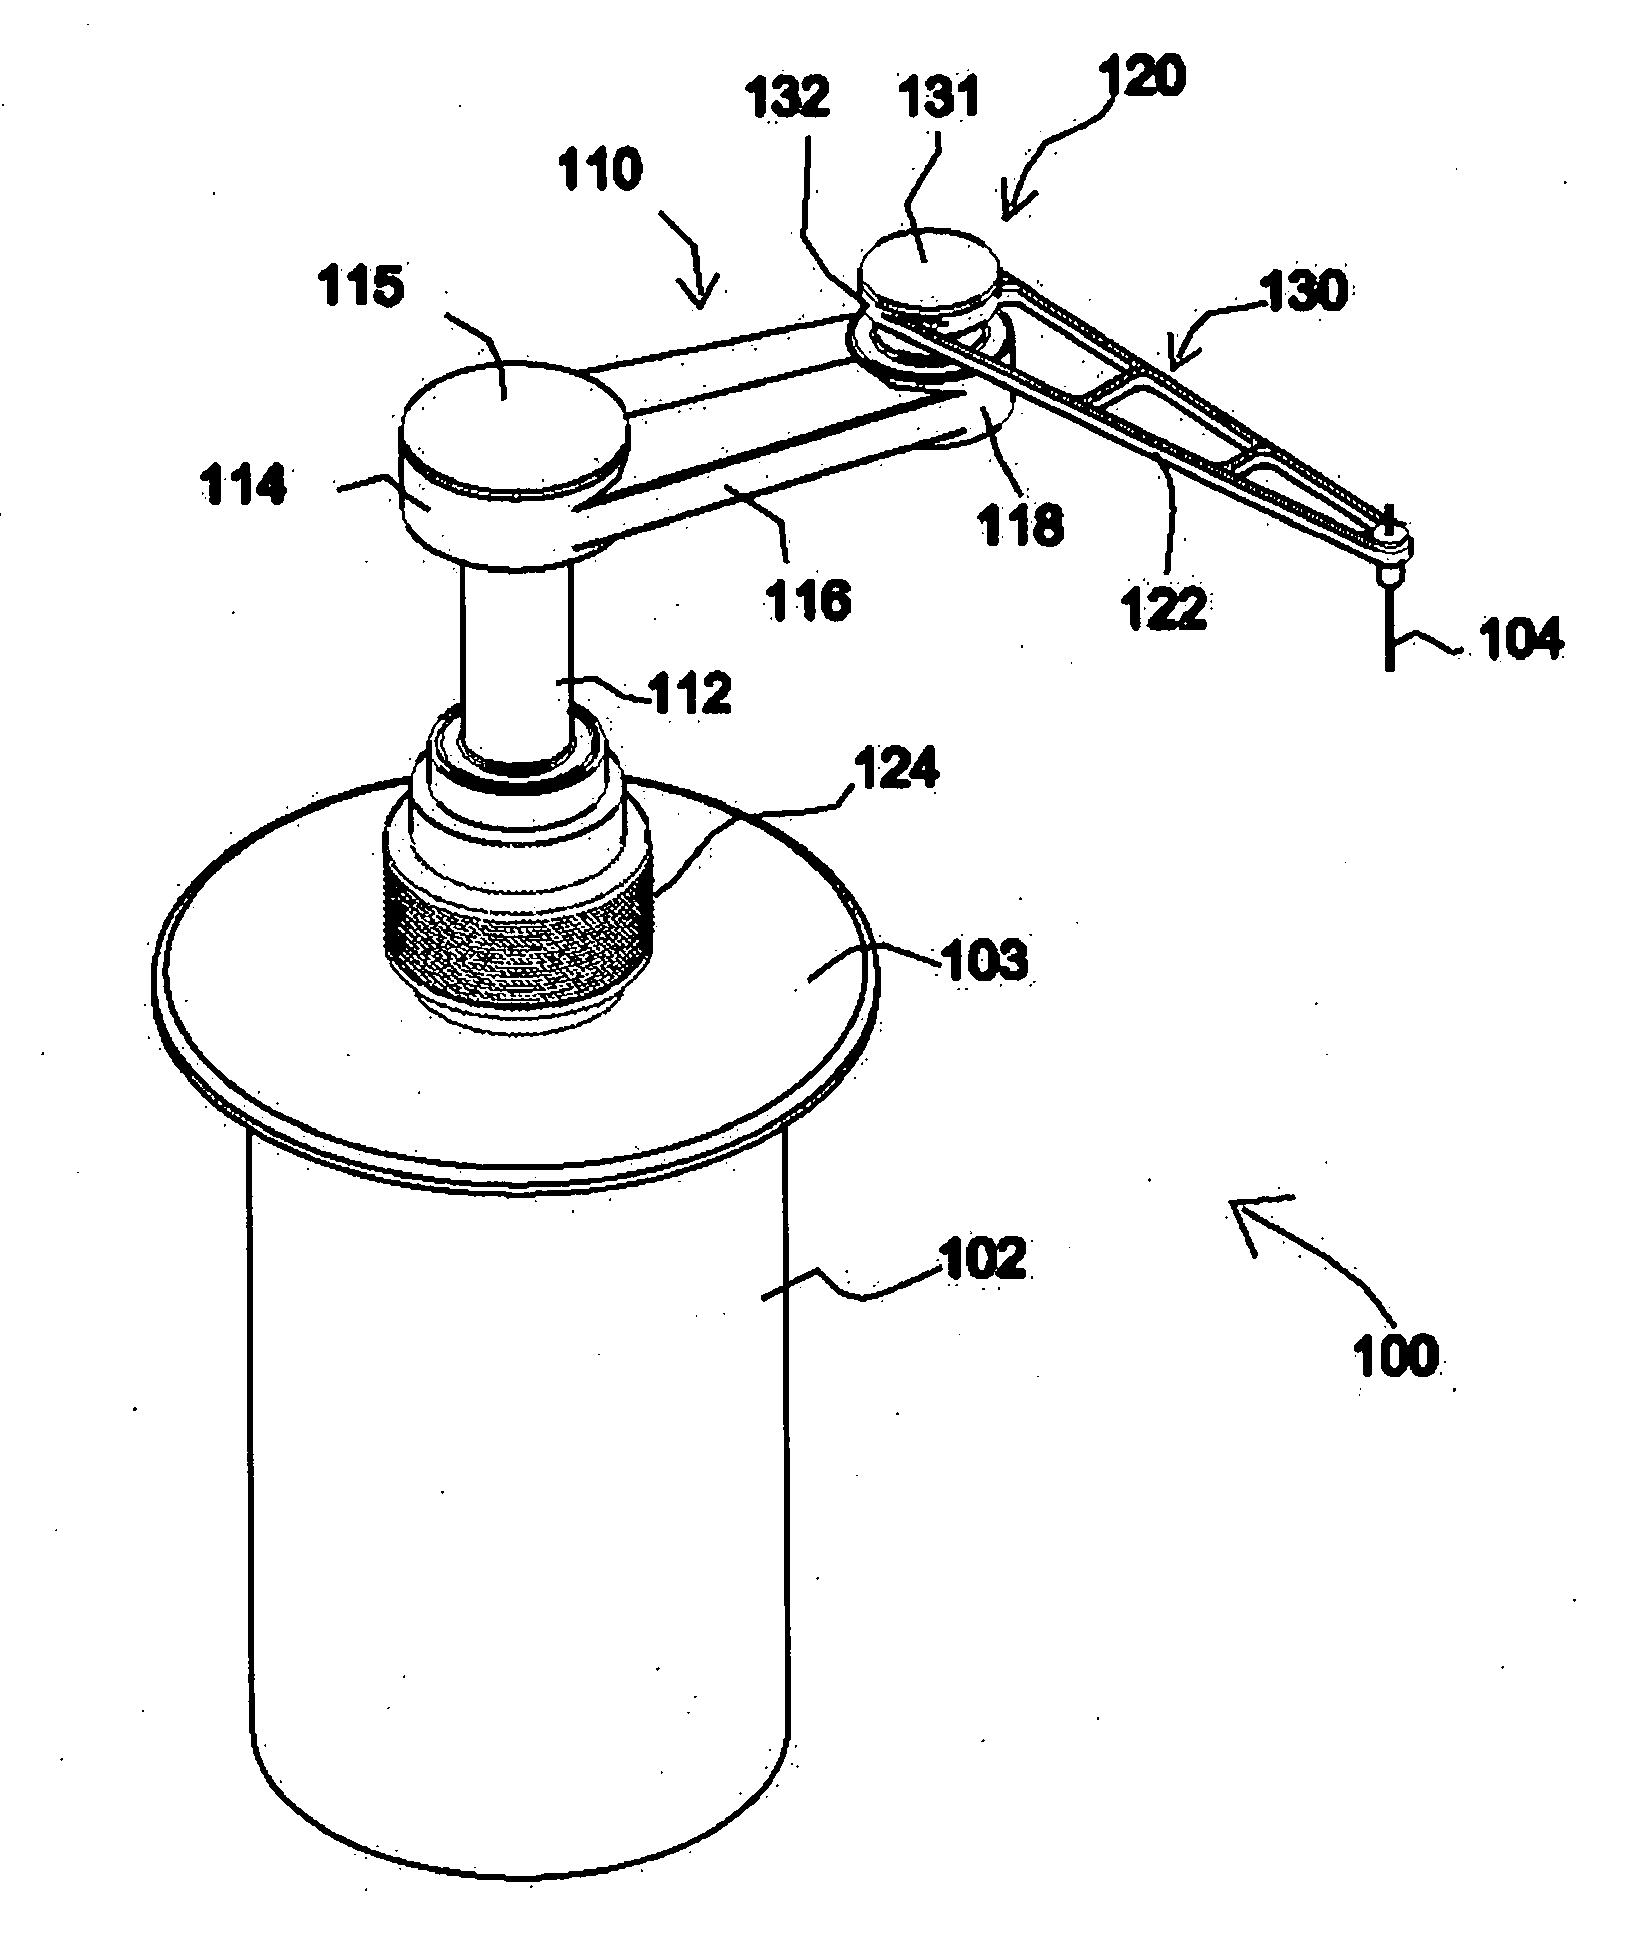 Articulated arm apparatus and system